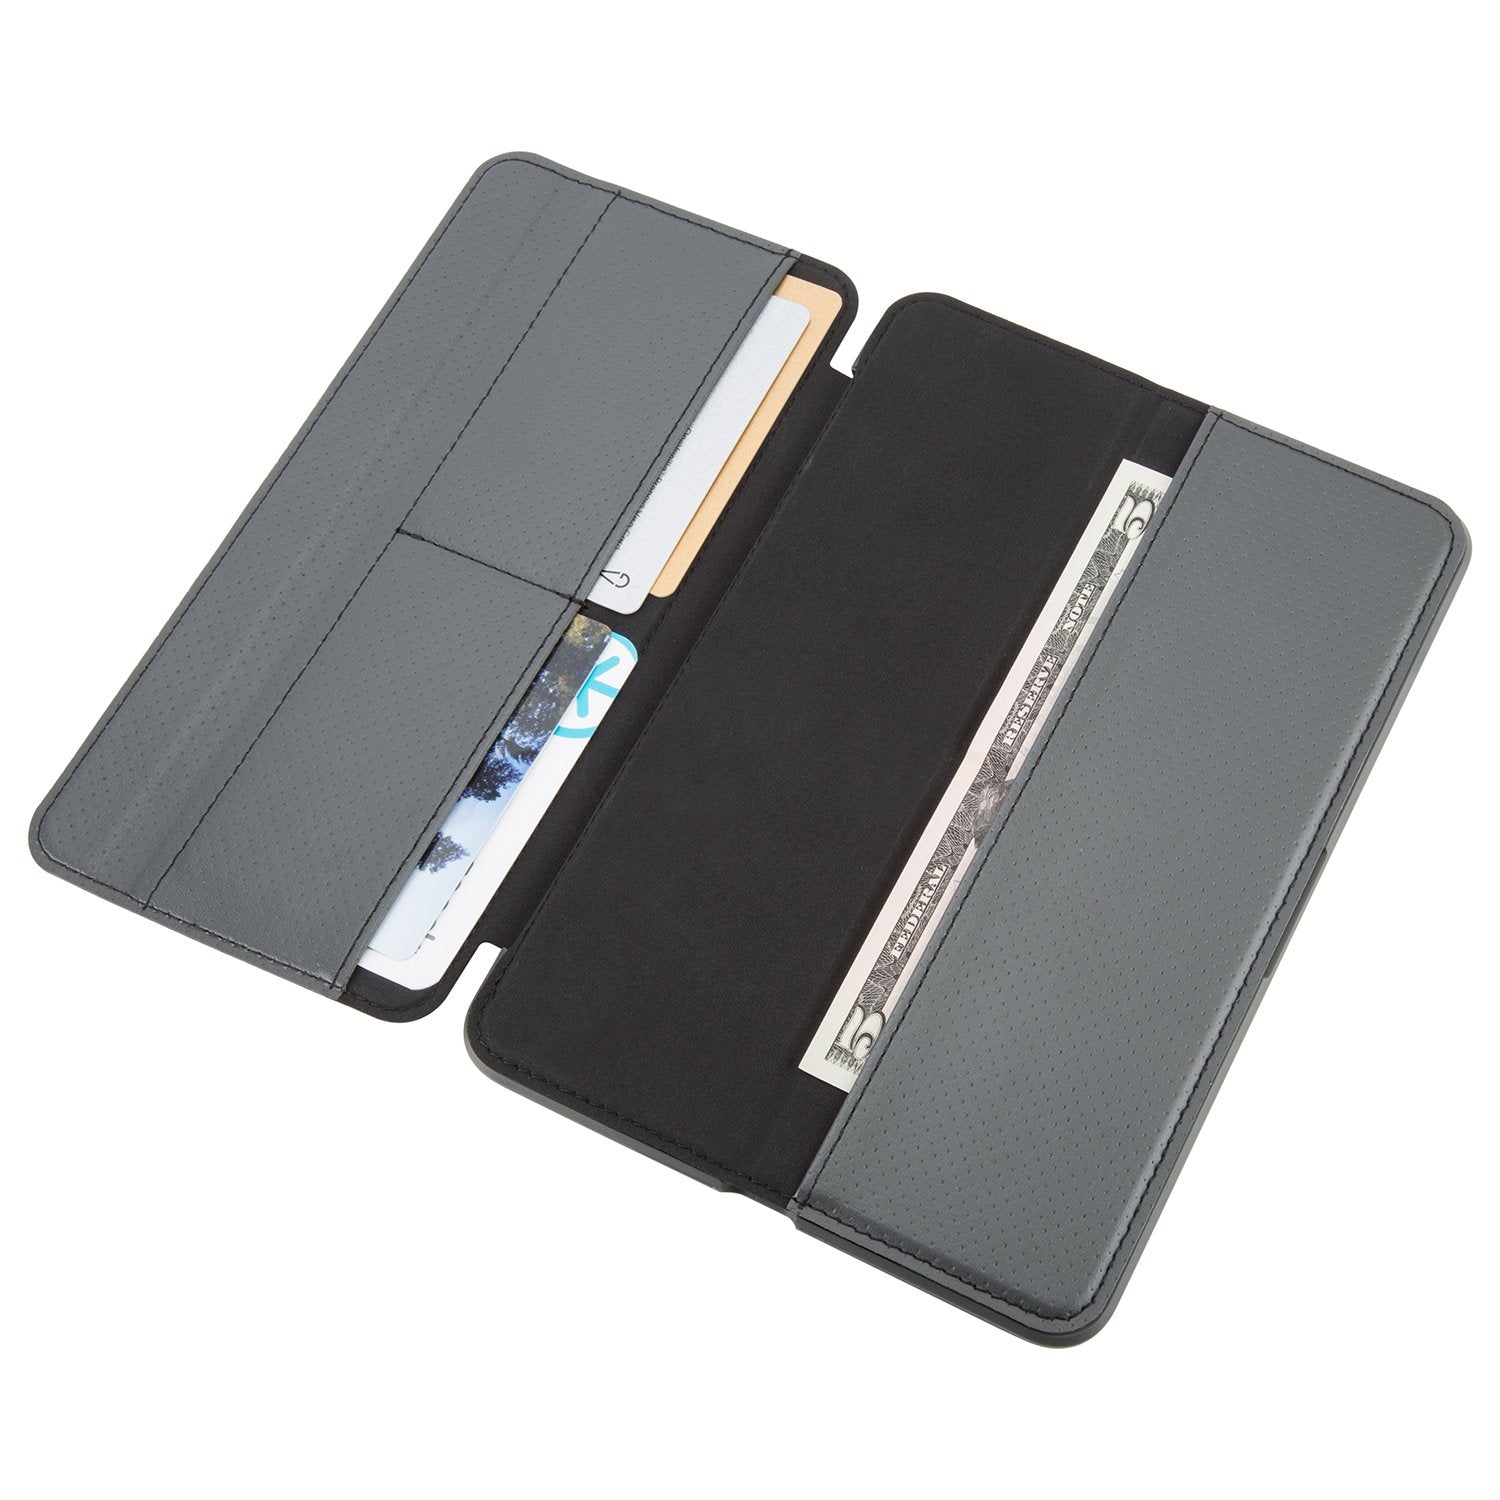 Speck Products VentureFolio Wallet Case for iPad Mini with Cover and Frame (SPK-A2965)  - Very Good